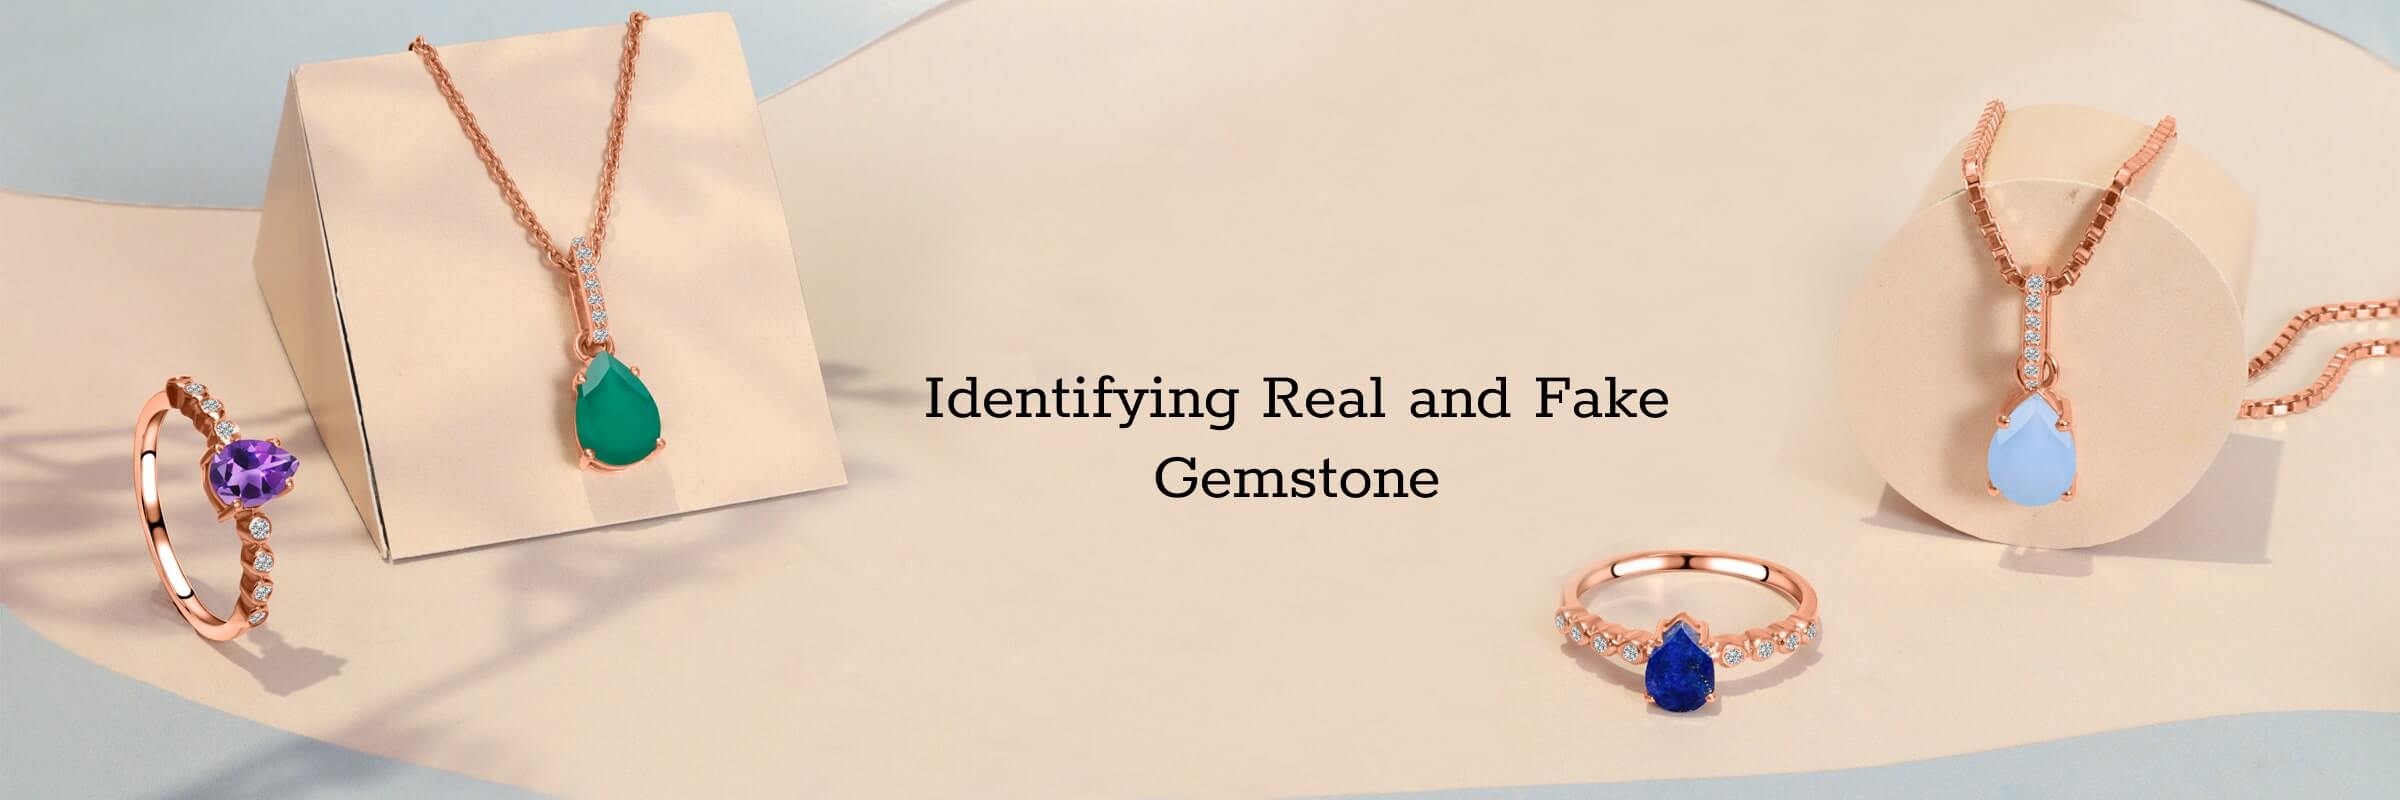 How to Identify if the Gemstone is Real or Fake?